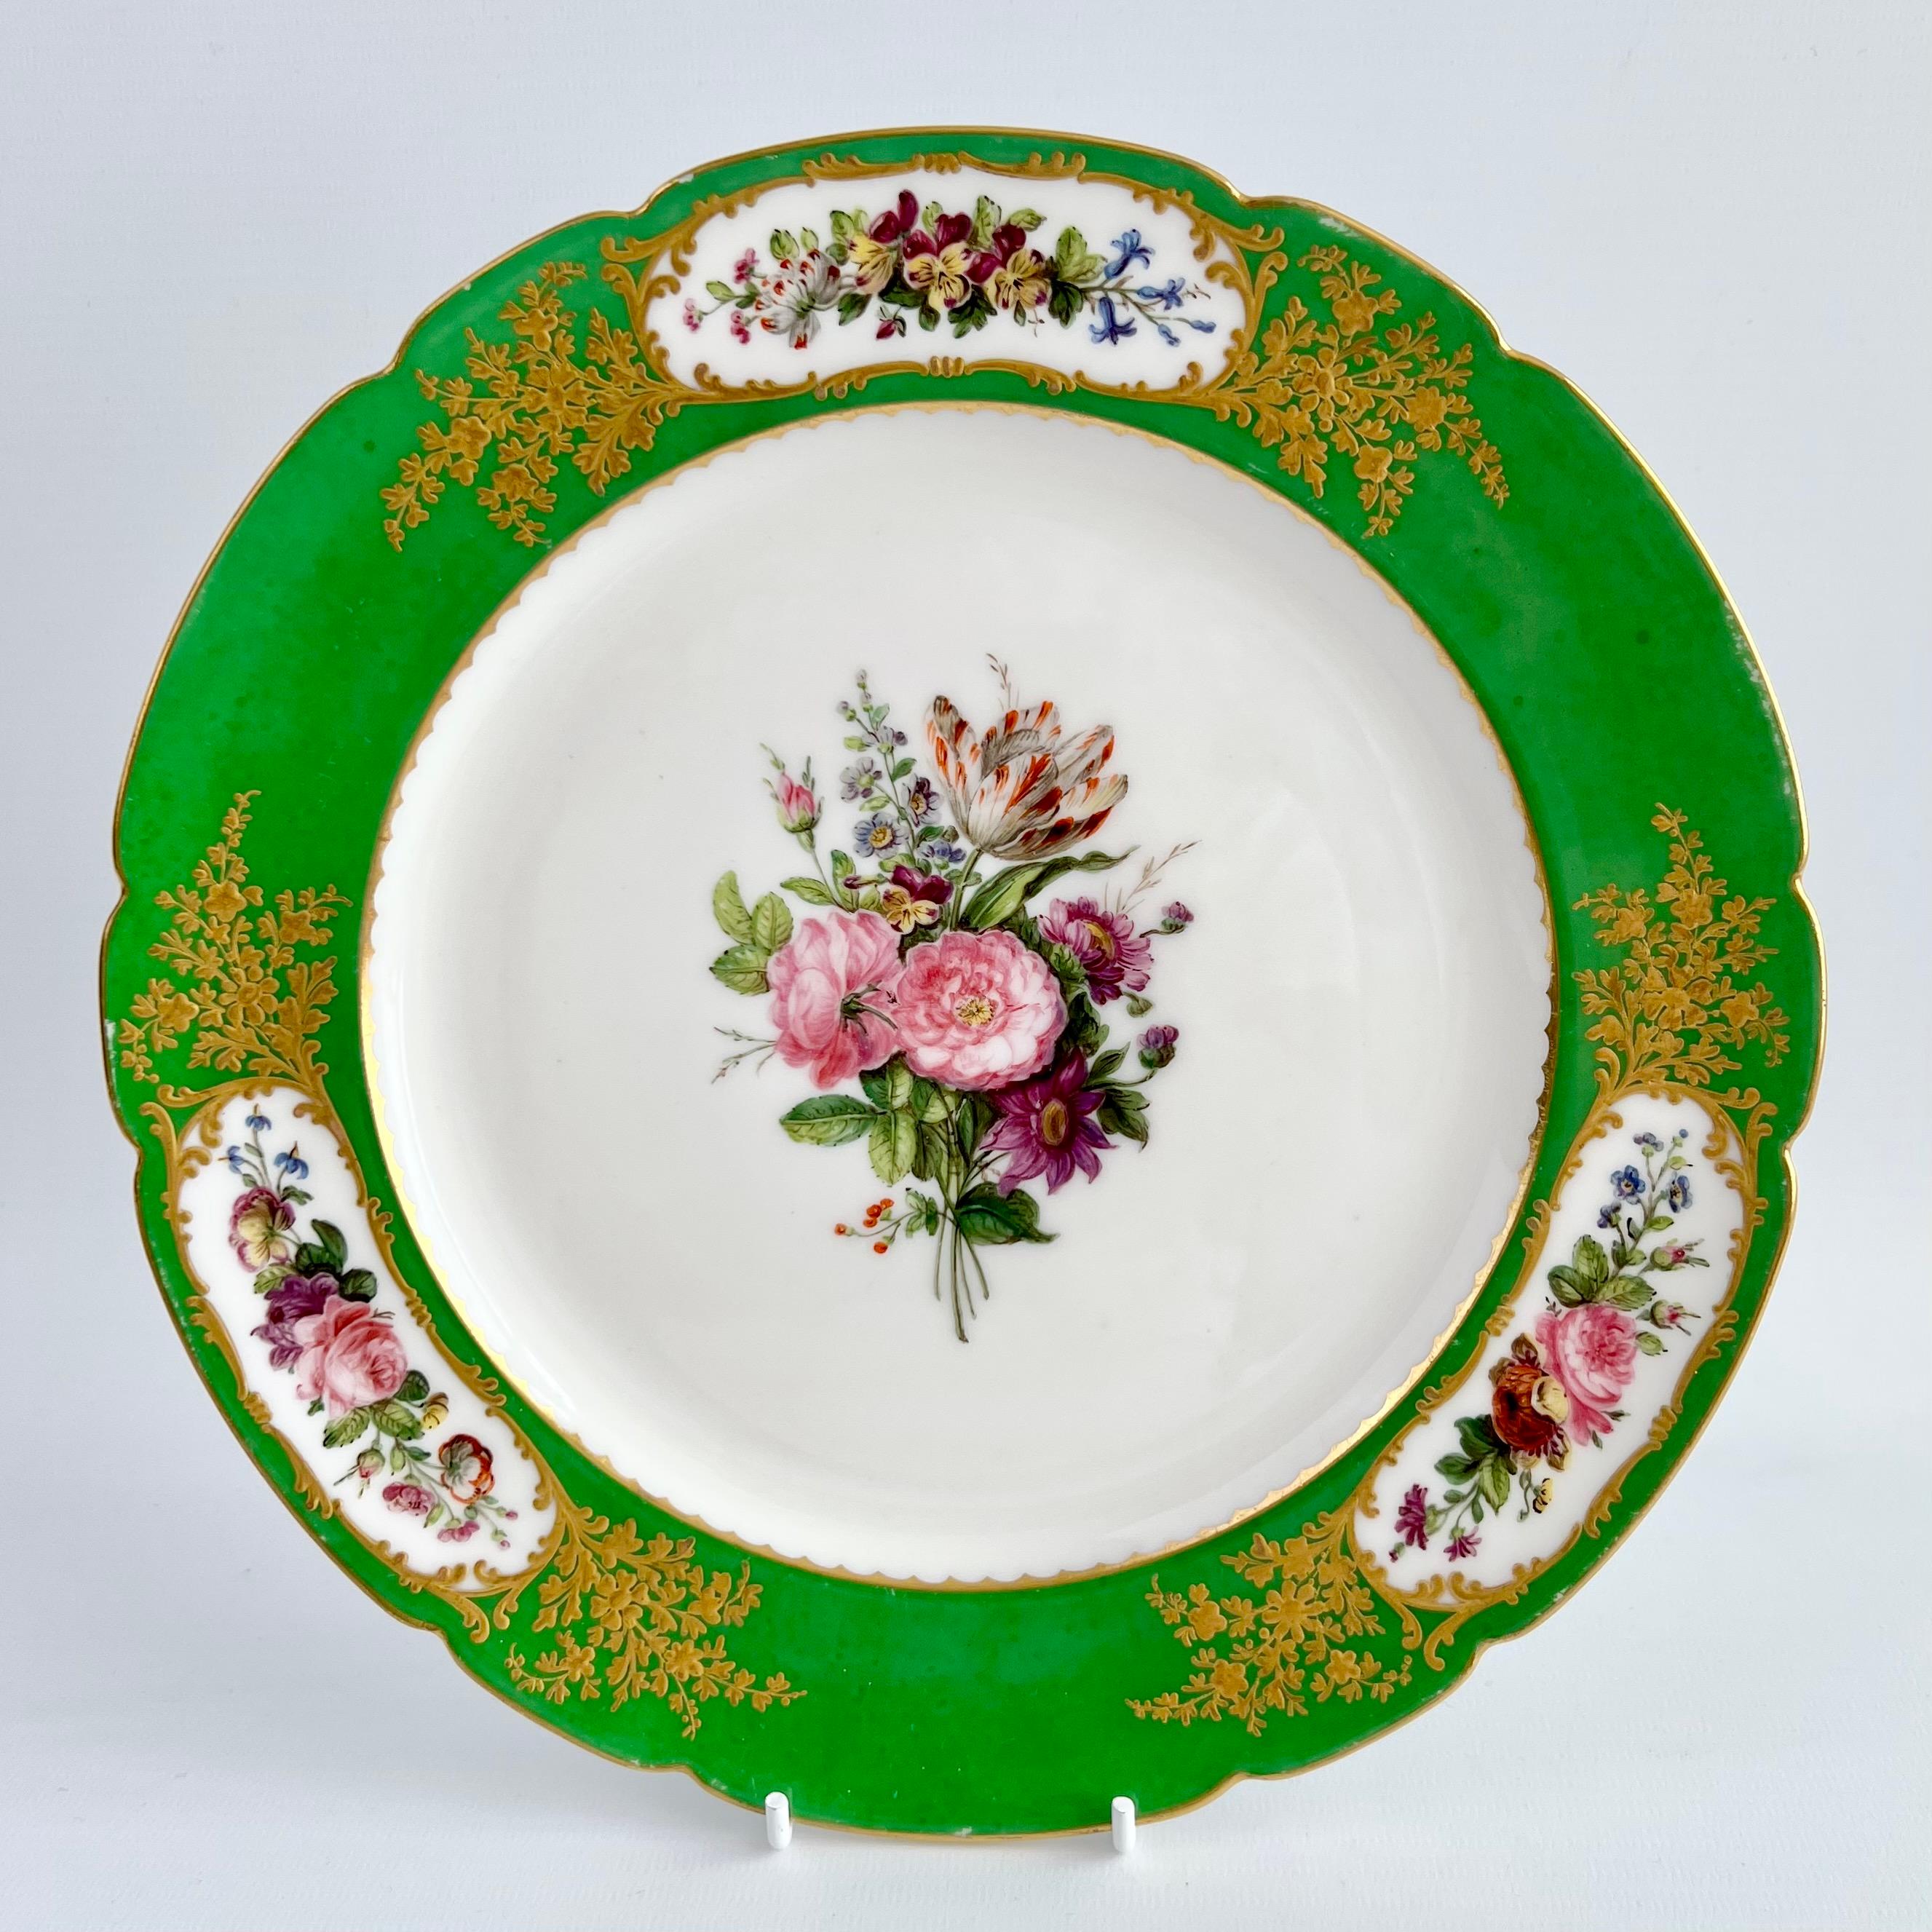 Vieux Paris Feuillet Set of 6 Plates, French Green, Gilt and Flowers, 1817-1834 1